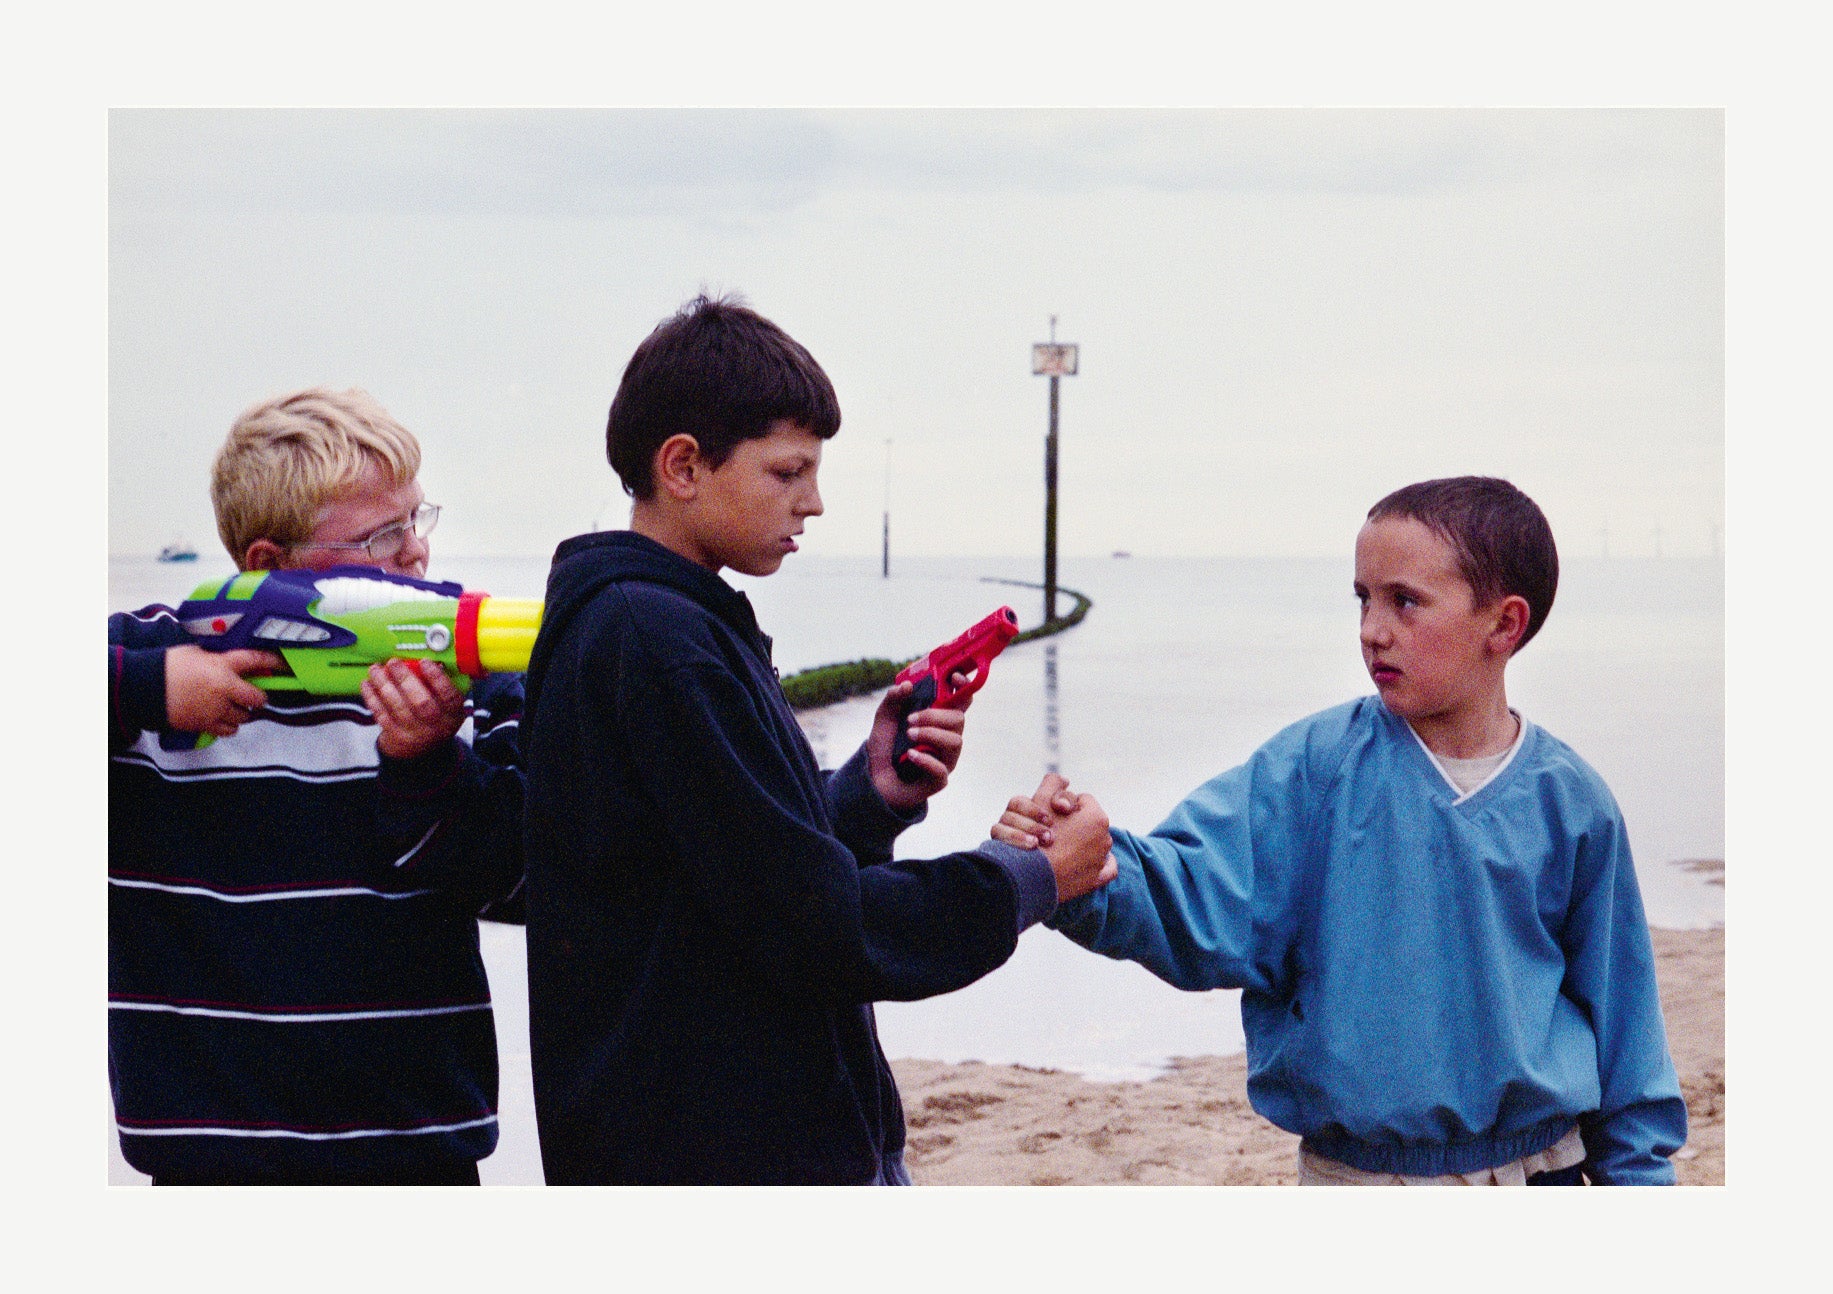 Prudence Murphy / 'Rhyl #14' from the series Boys with Guns, 2011